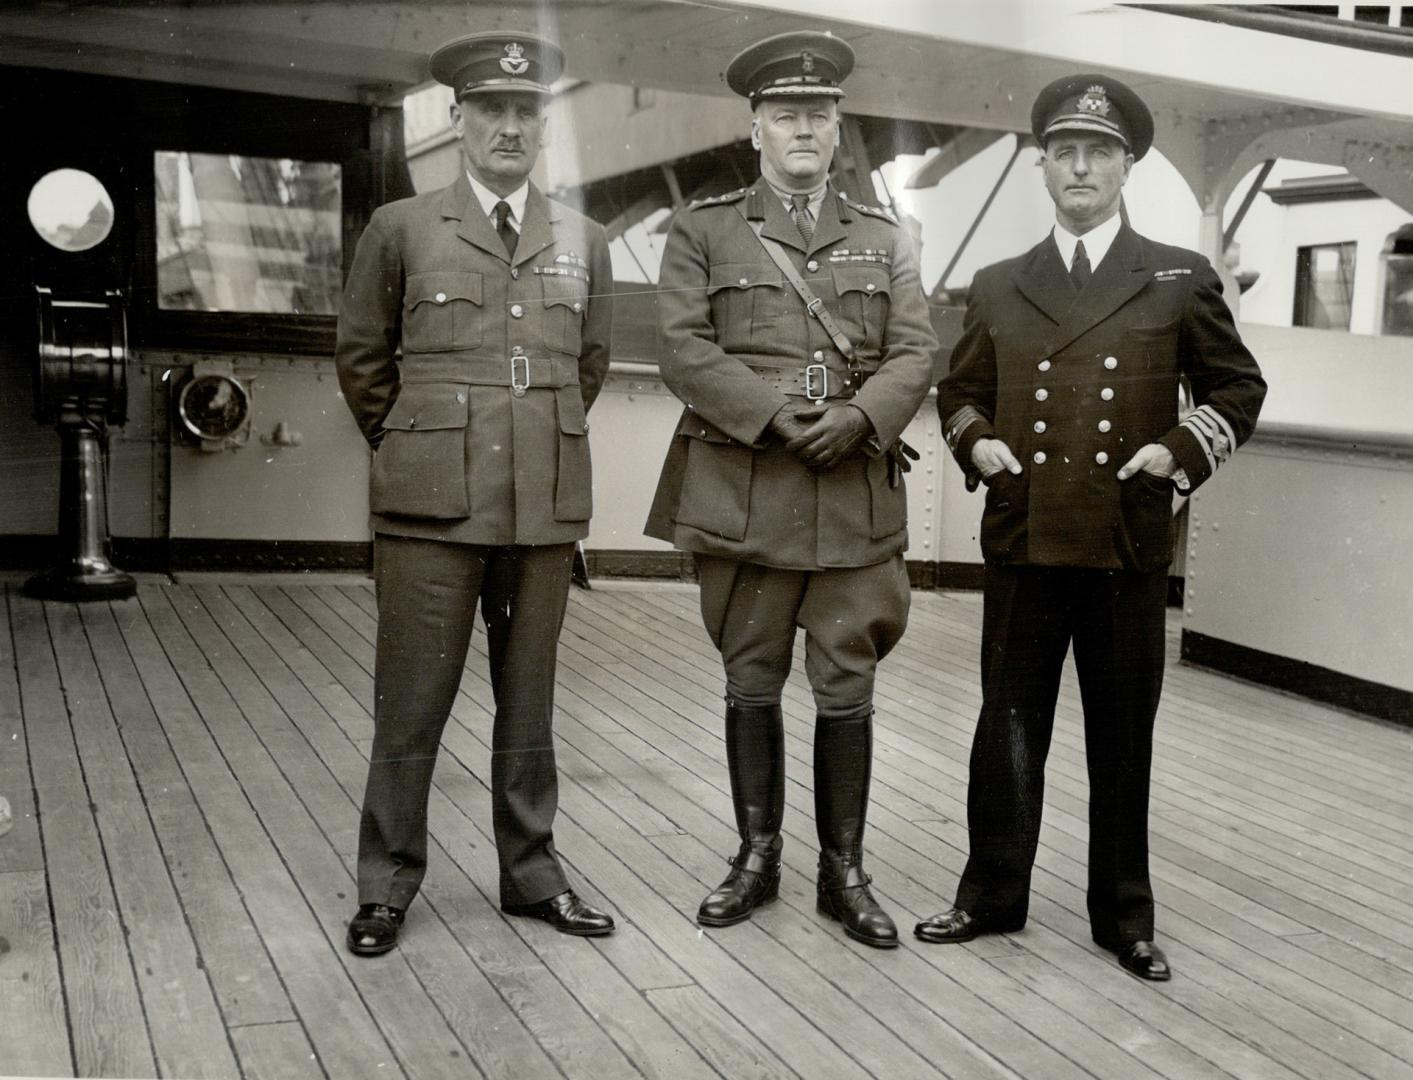 Command Coronation troops, Just before the Canadian pacific liner Montcalm sailed from Montreal yesterday (April 28) a meeting of the commanders took place